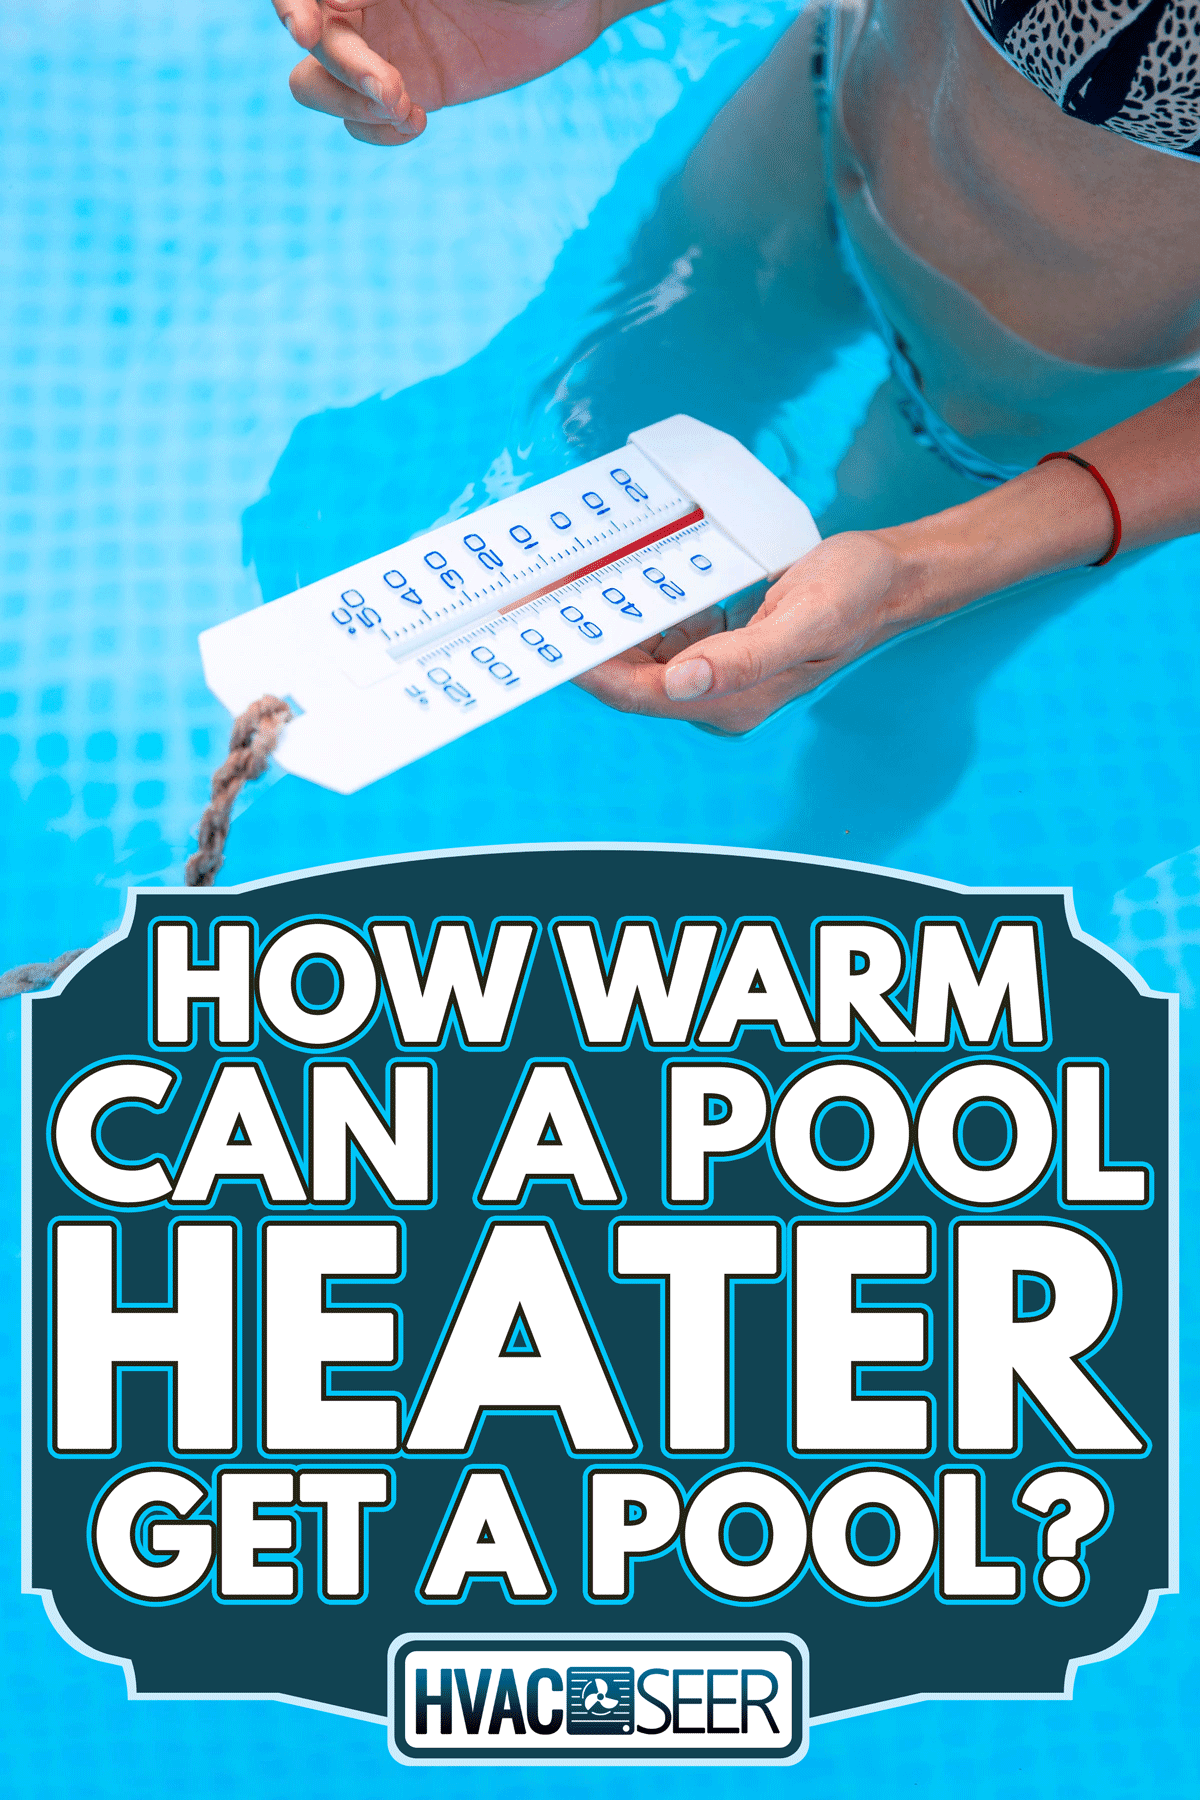 A pool water thermometer in female hand checking the temperature warmth, How Warm Can a Pool Heater Get a Pool?